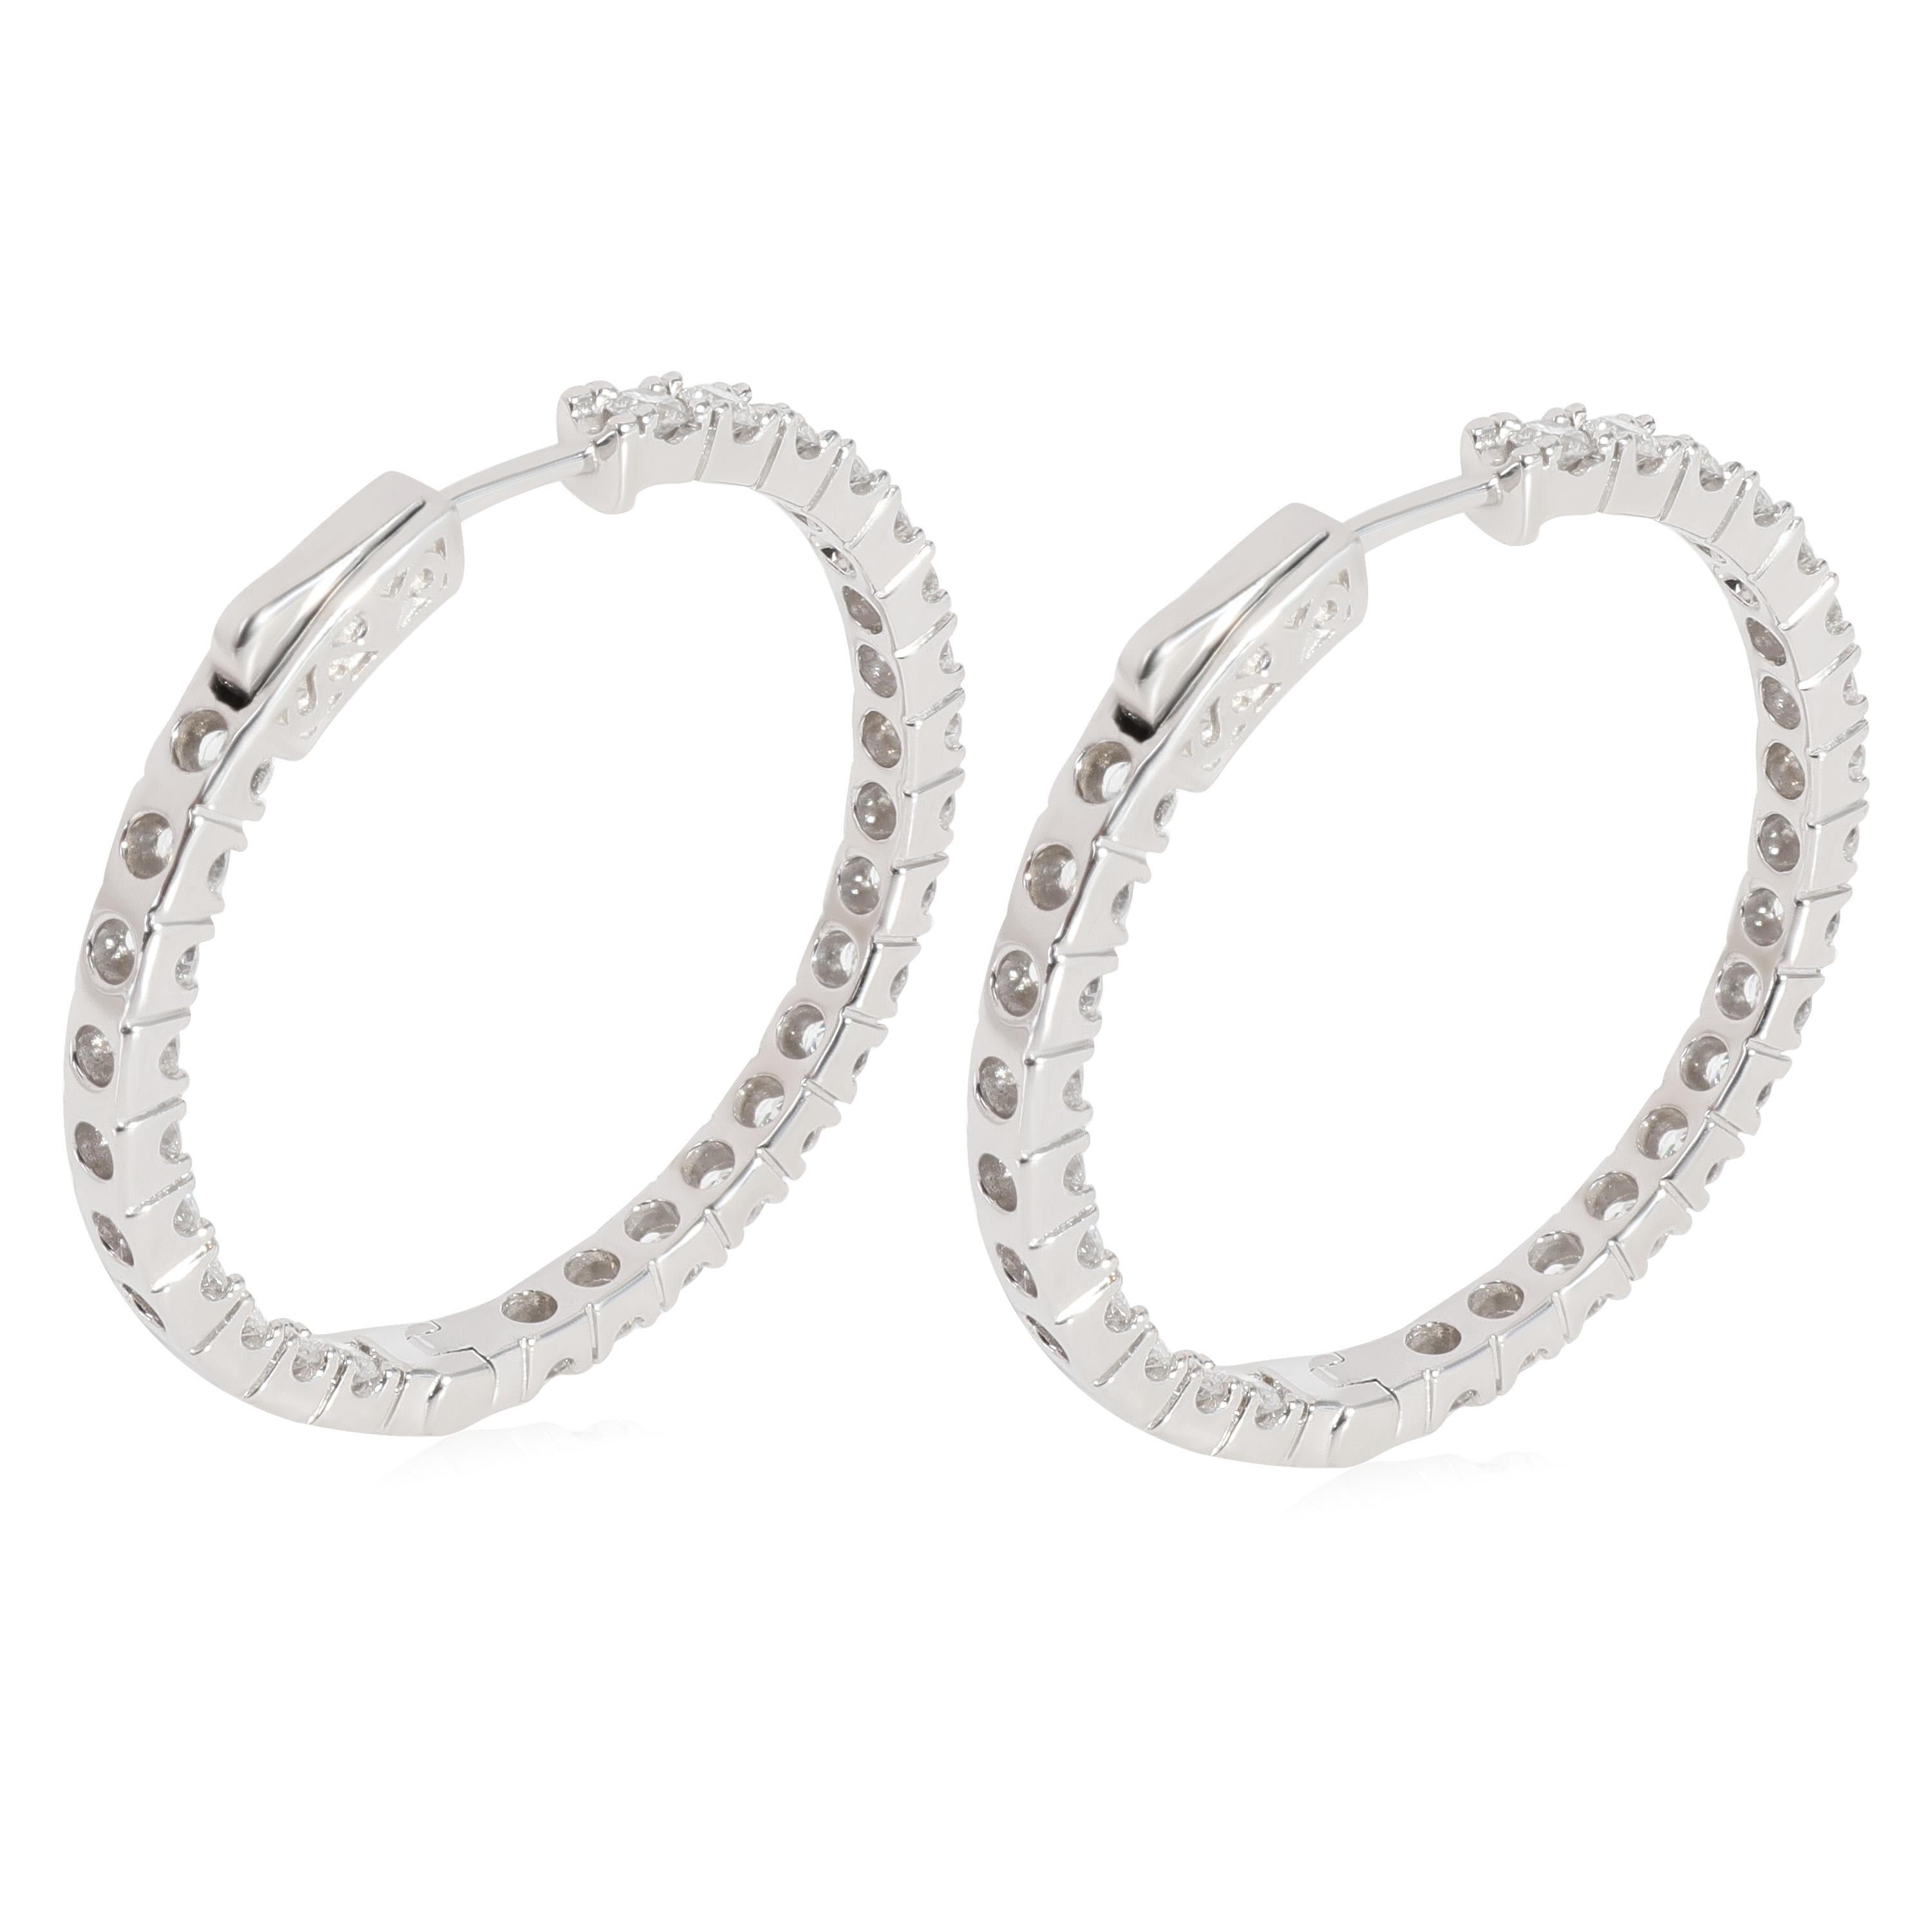 Diamond Inside Out Hoop Earrings in 14K White Gold 3.00 CTW

PRIMARY DETAILS
SKU: 116669
Listing Title: Diamond Inside Out Hoop Earrings in 14K White Gold 3.00 CTW
Condition Description: Retails for 4500 USD. In excellent condition and recently